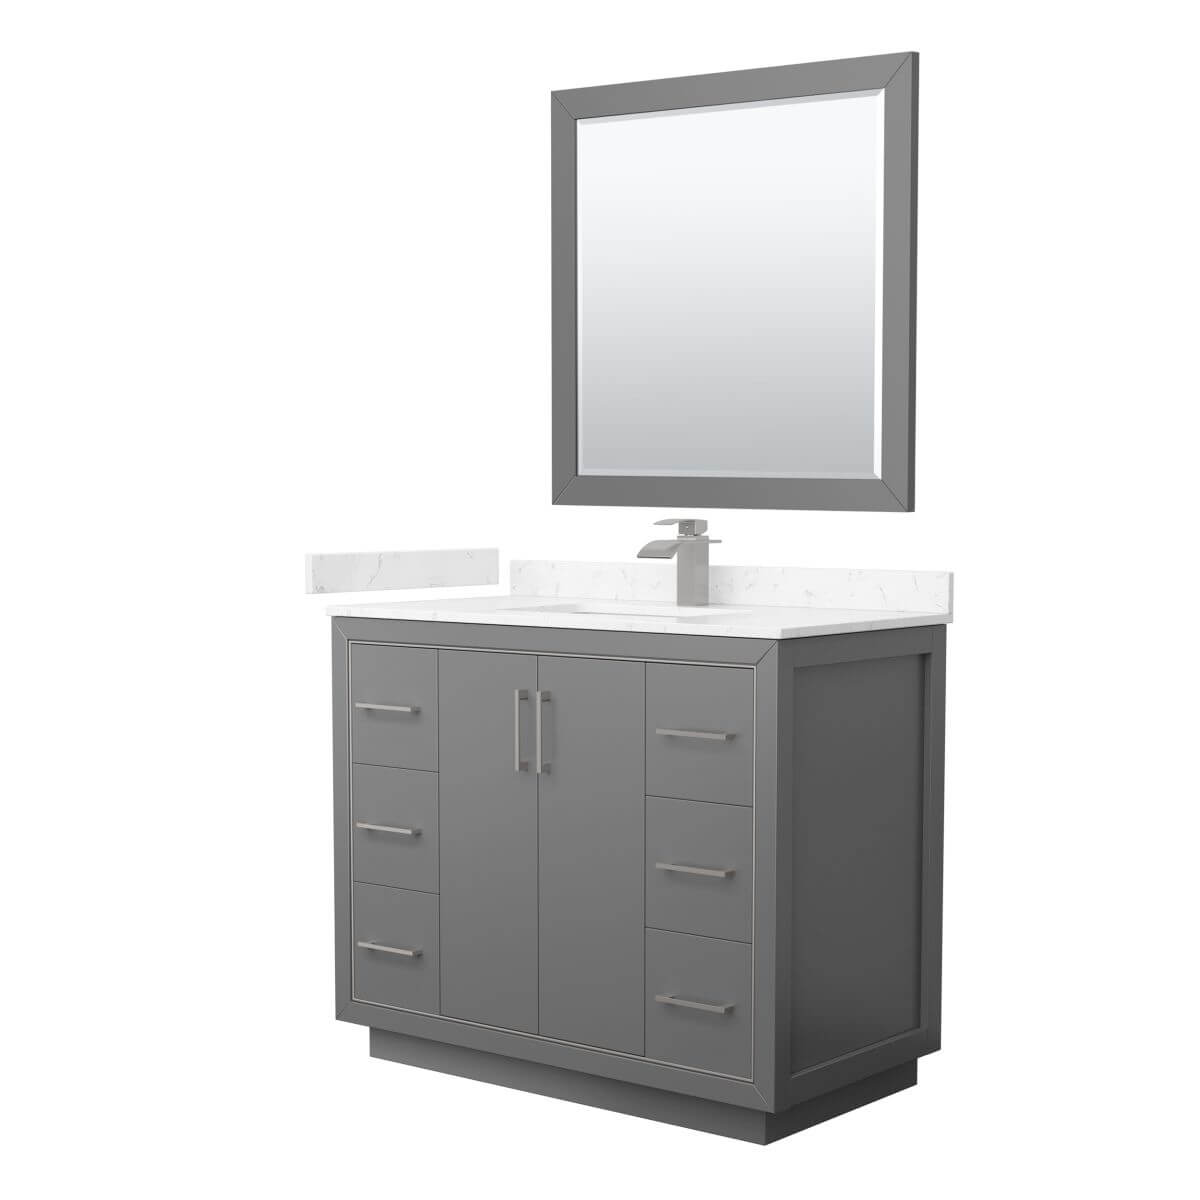 Wyndham Collection WCF111142SKGC2UNSM34 Icon 42 inch Single Bathroom Vanity in Dark Gray with Carrara Cultured Marble Countertop, Undermount Square Sink, Brushed Nickel Trim and 34 Inch Mirror